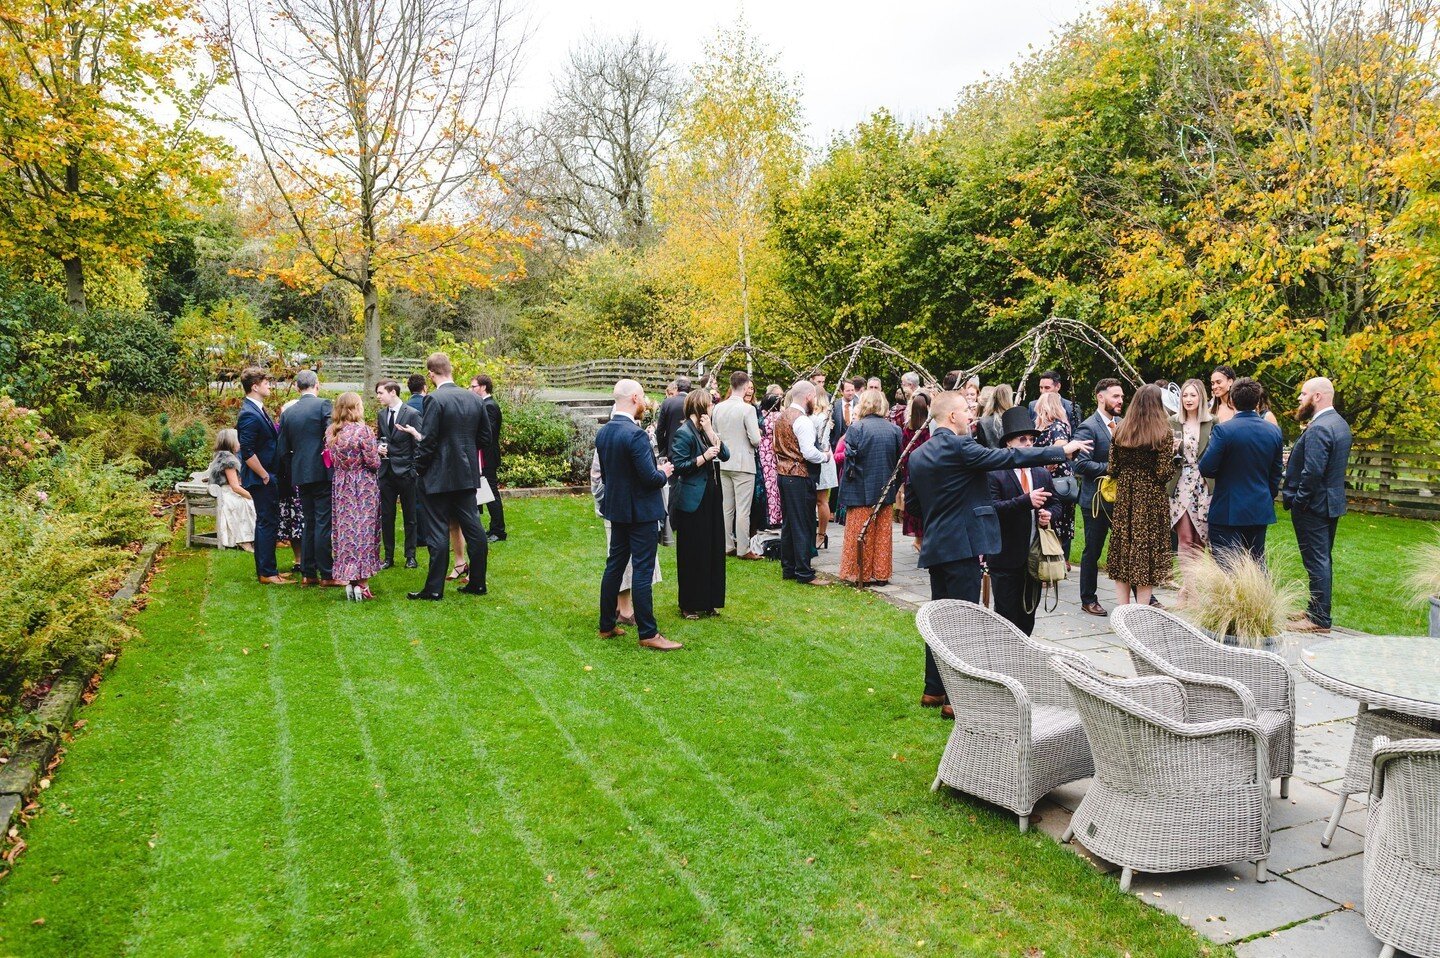 Our main outdoor space in full flow at a recent reception 💒

It's starting to warm up and that means, this space can be used for ceremonies as well as receptions! A pituresque setting surrounded by trees creates a truly special day for you and your 